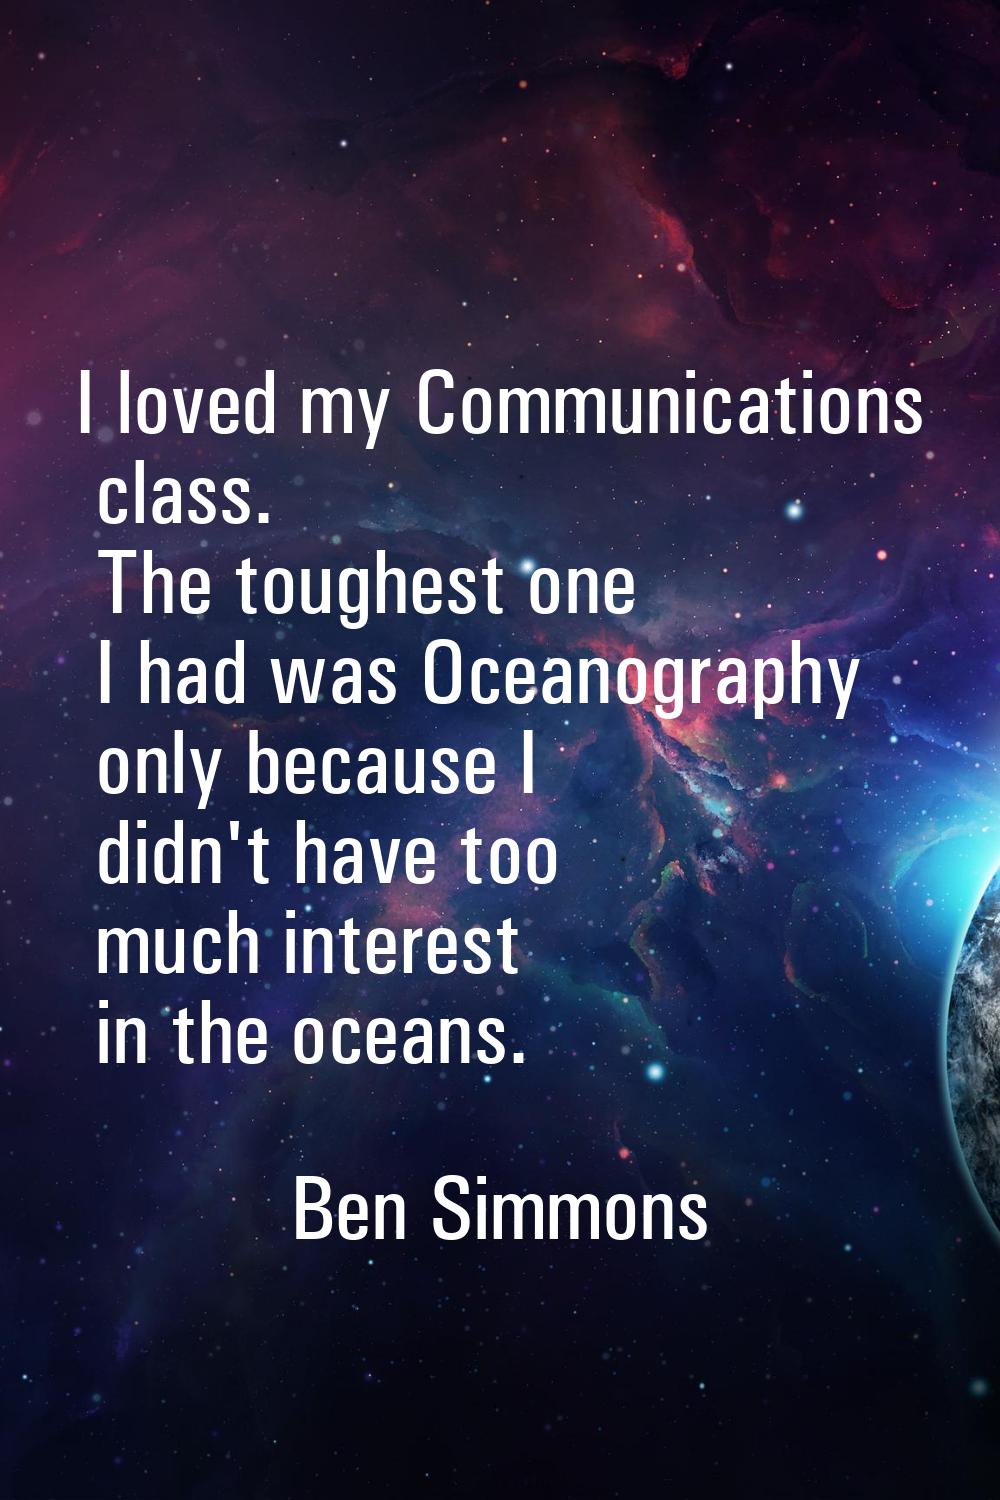 I loved my Communications class. The toughest one I had was Oceanography only because I didn't have